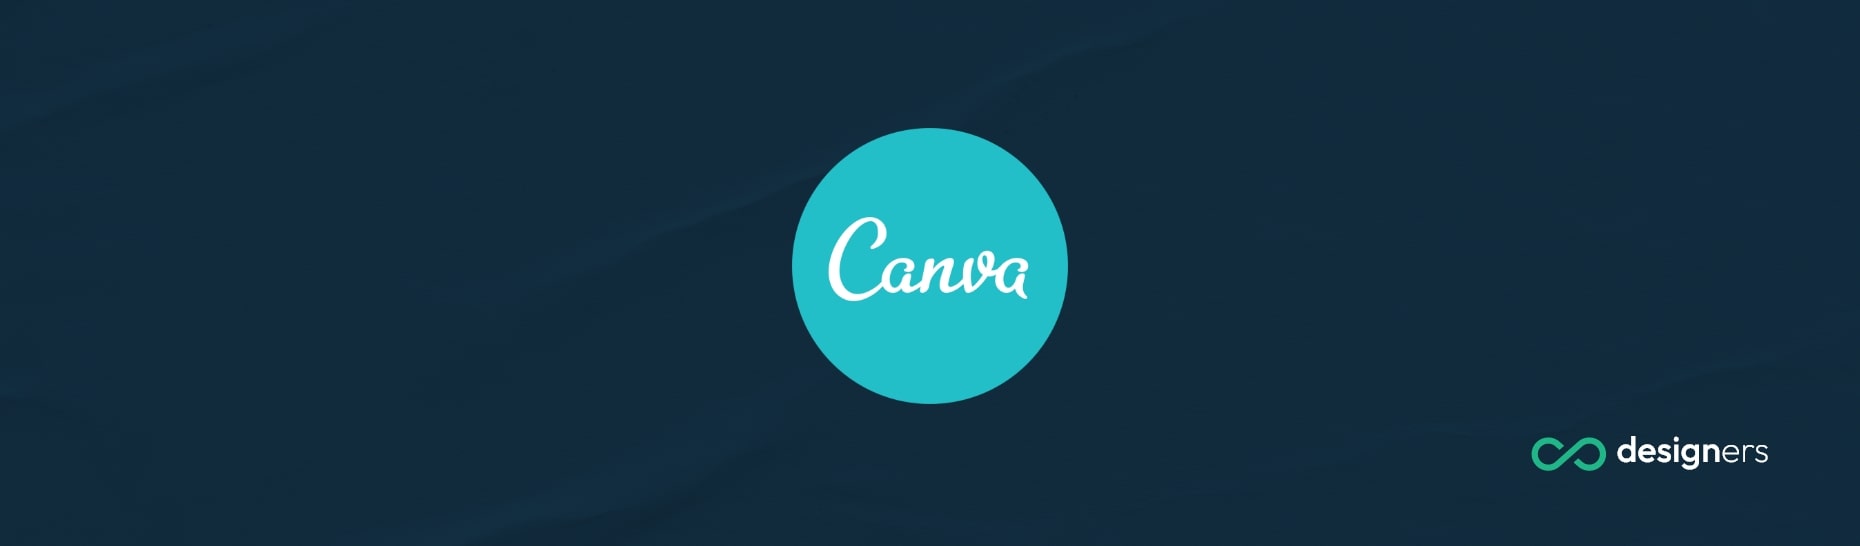 Does Canva Have Folding Cards?